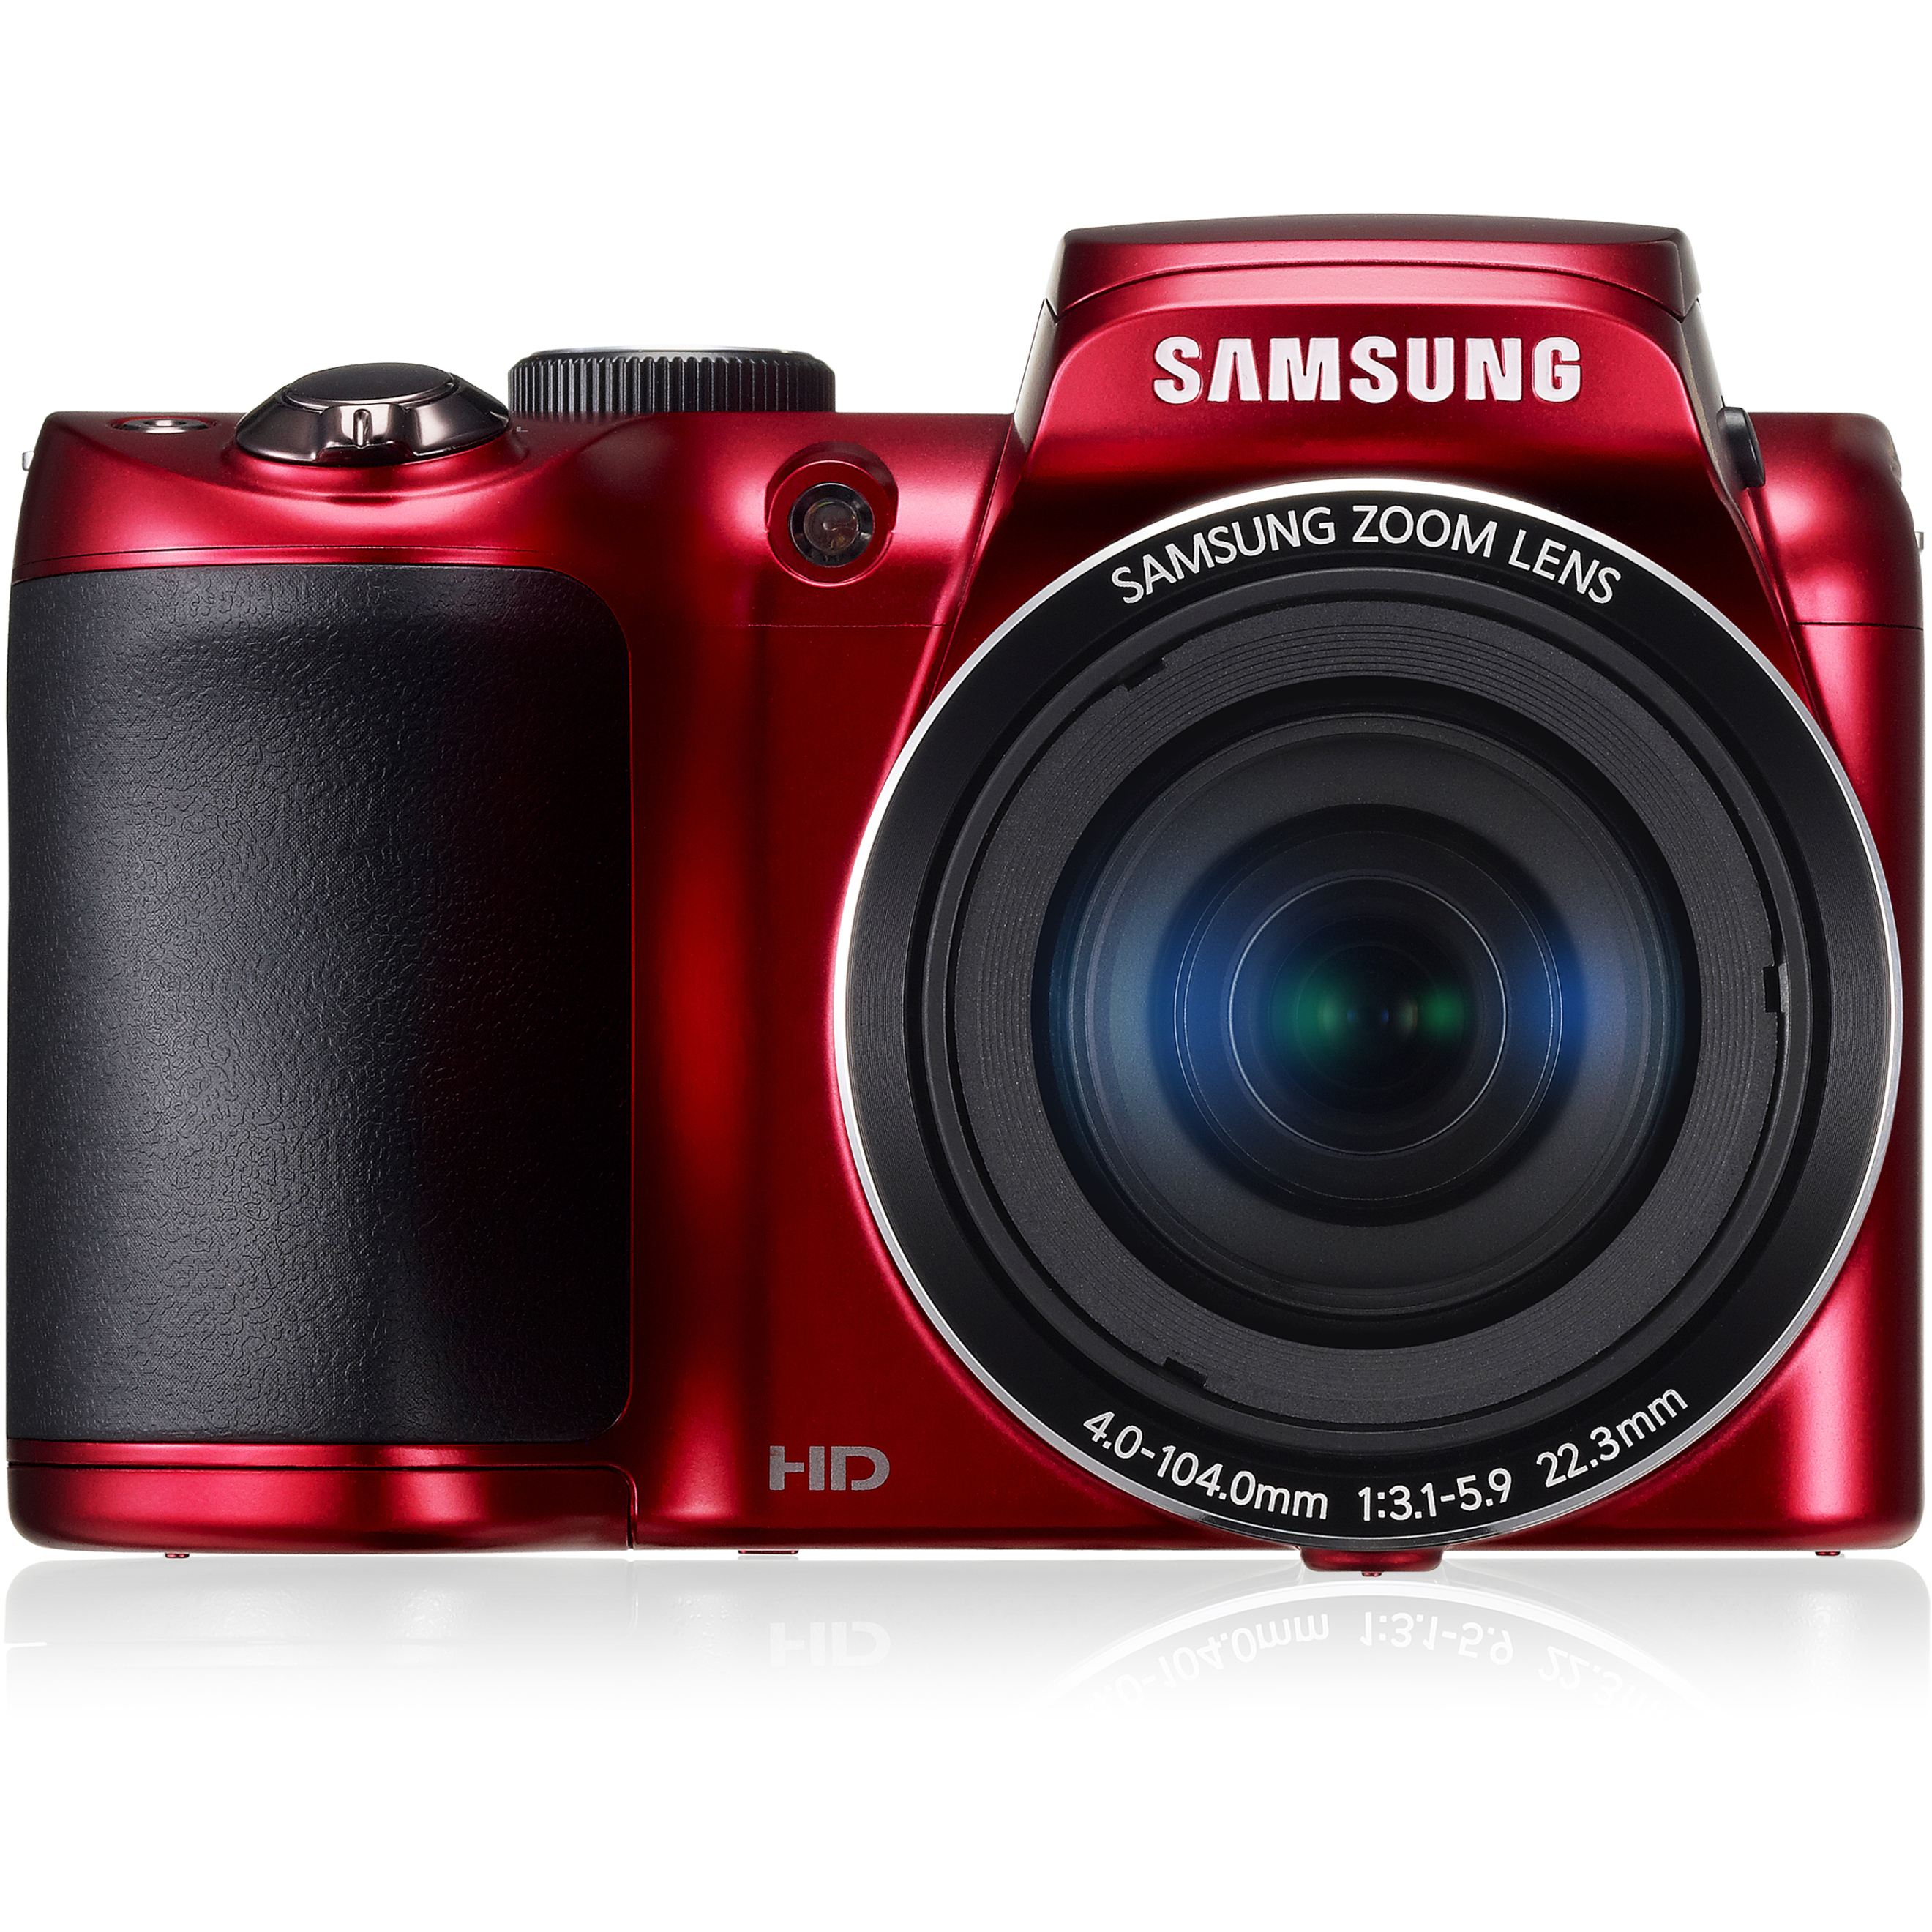 Samsung WB100 16.2 Megapixel Compact Camera, Red - image 3 of 6